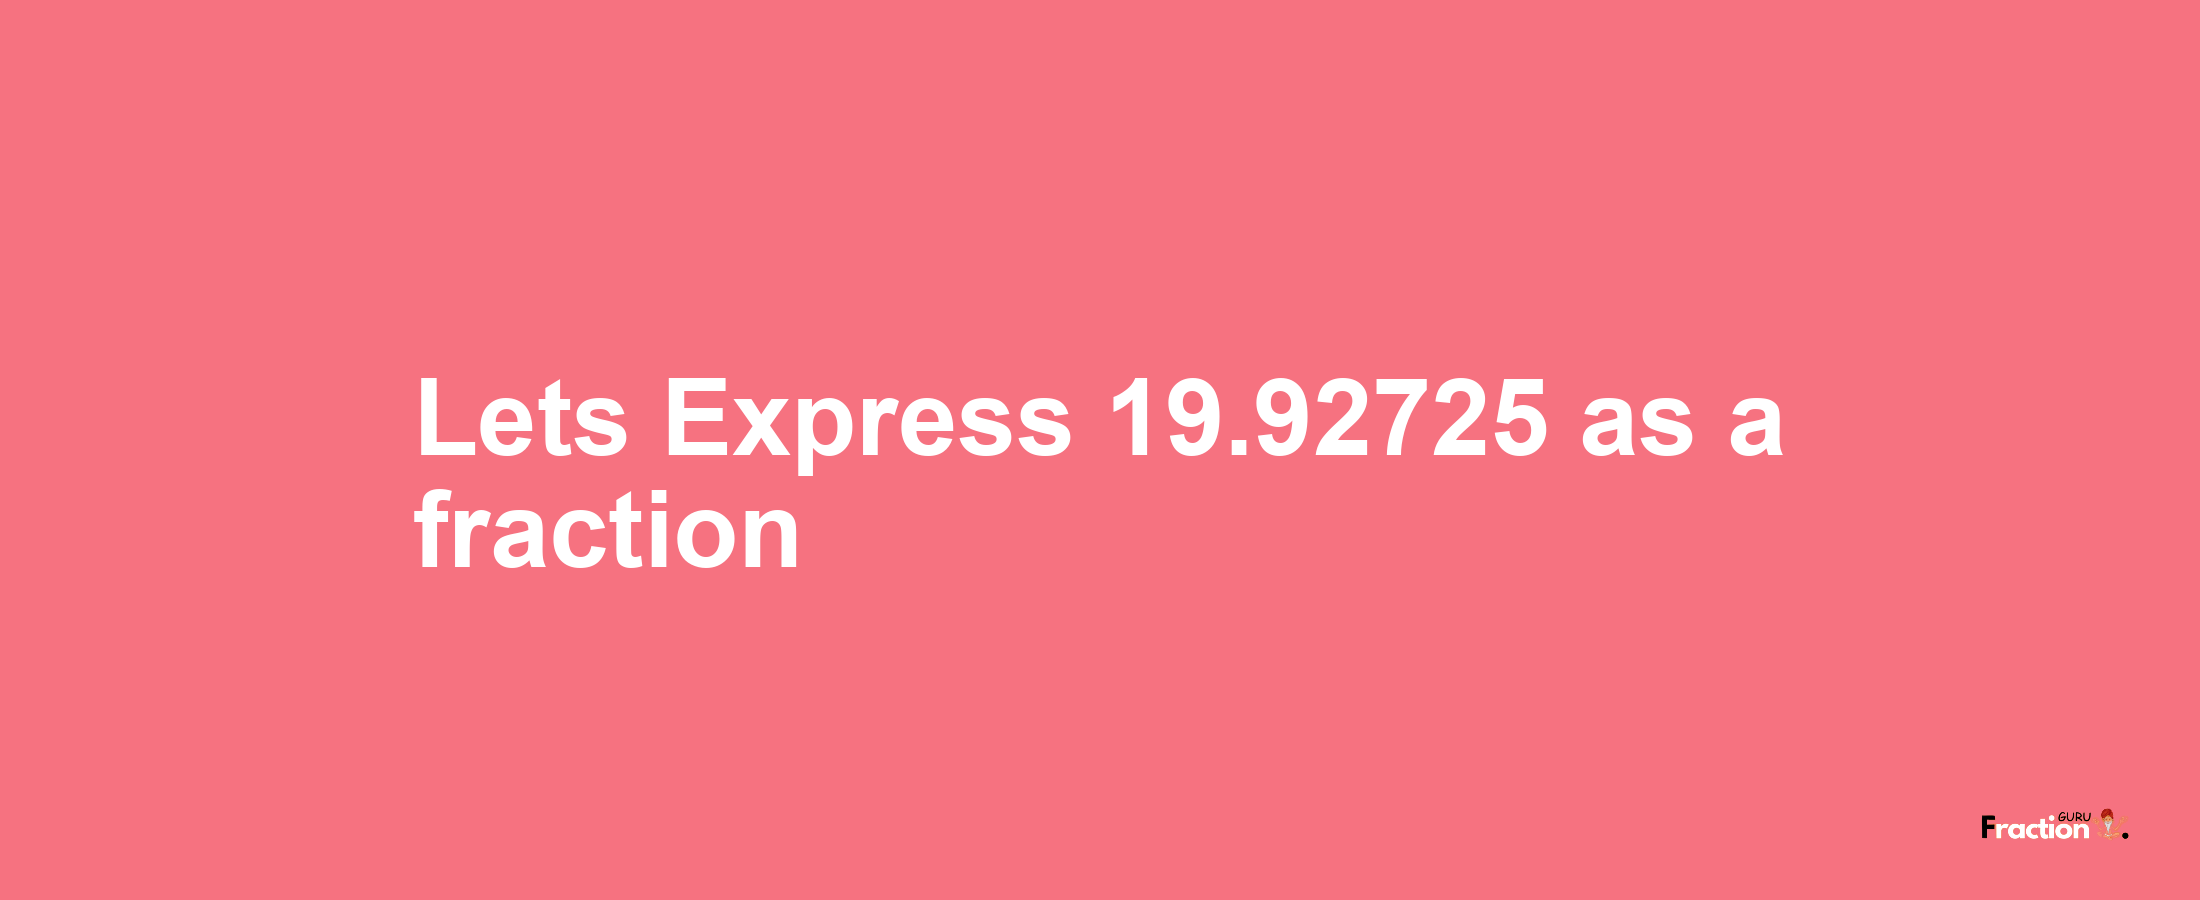 Lets Express 19.92725 as afraction